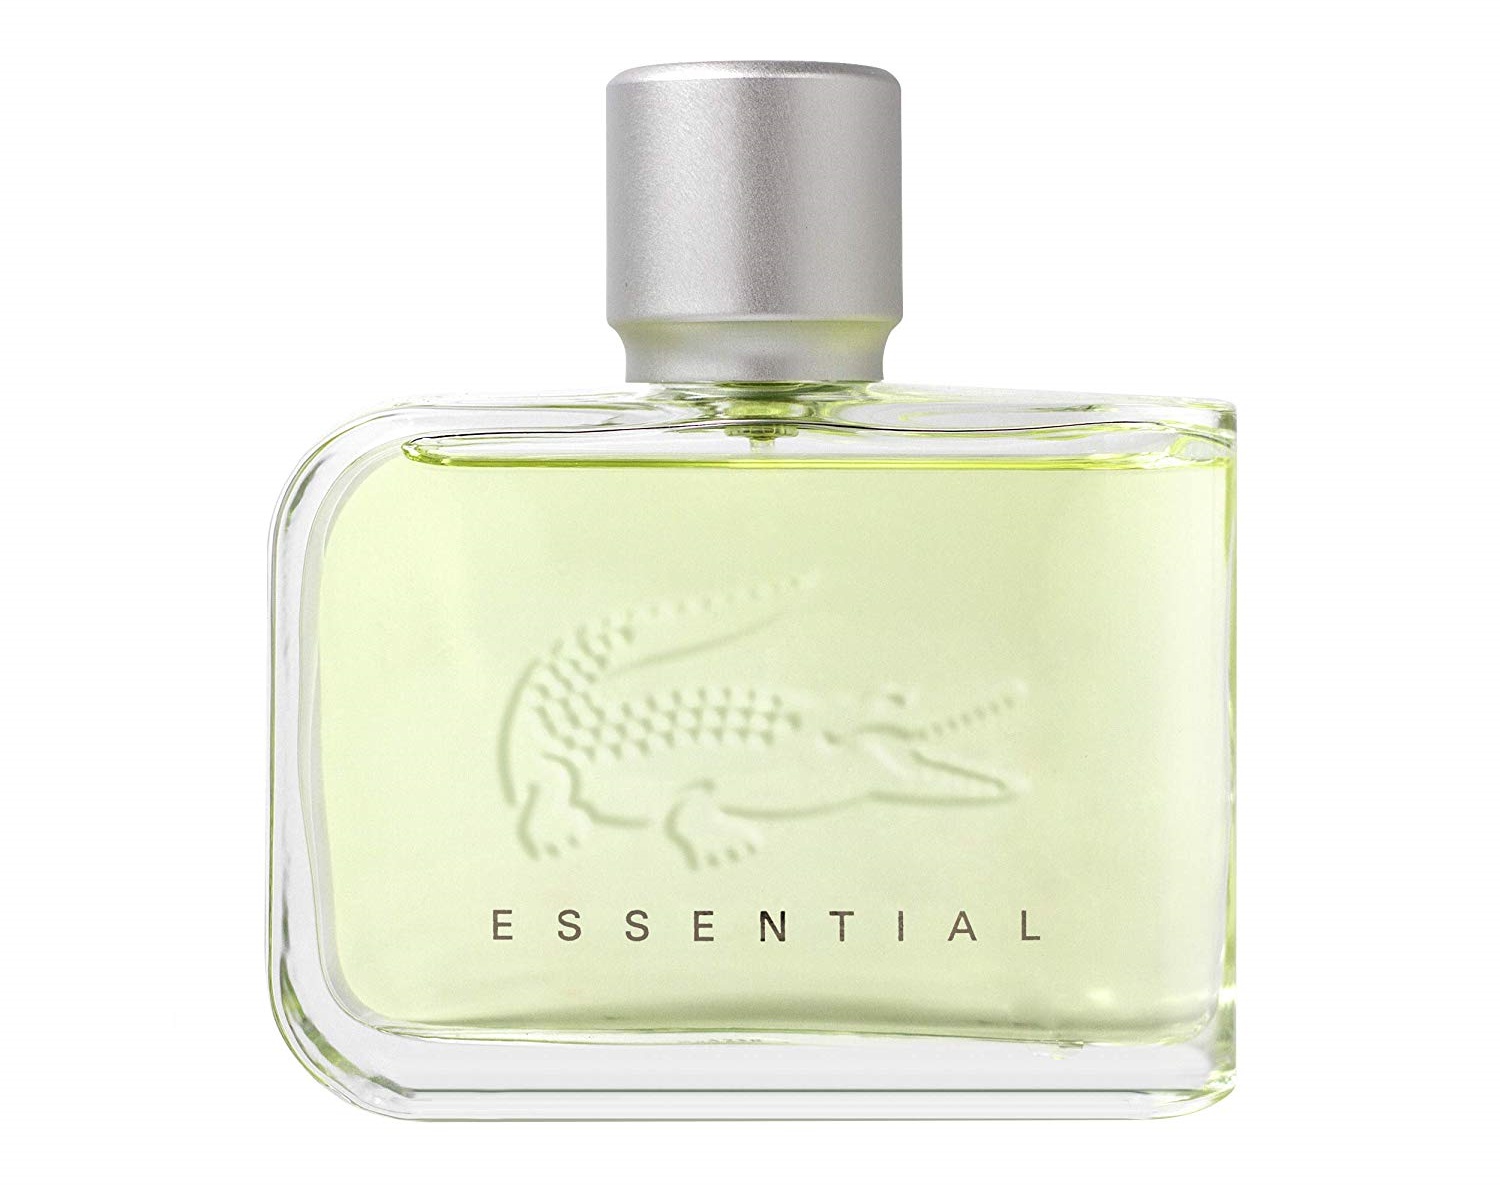 Essential by Lacoste Review 2